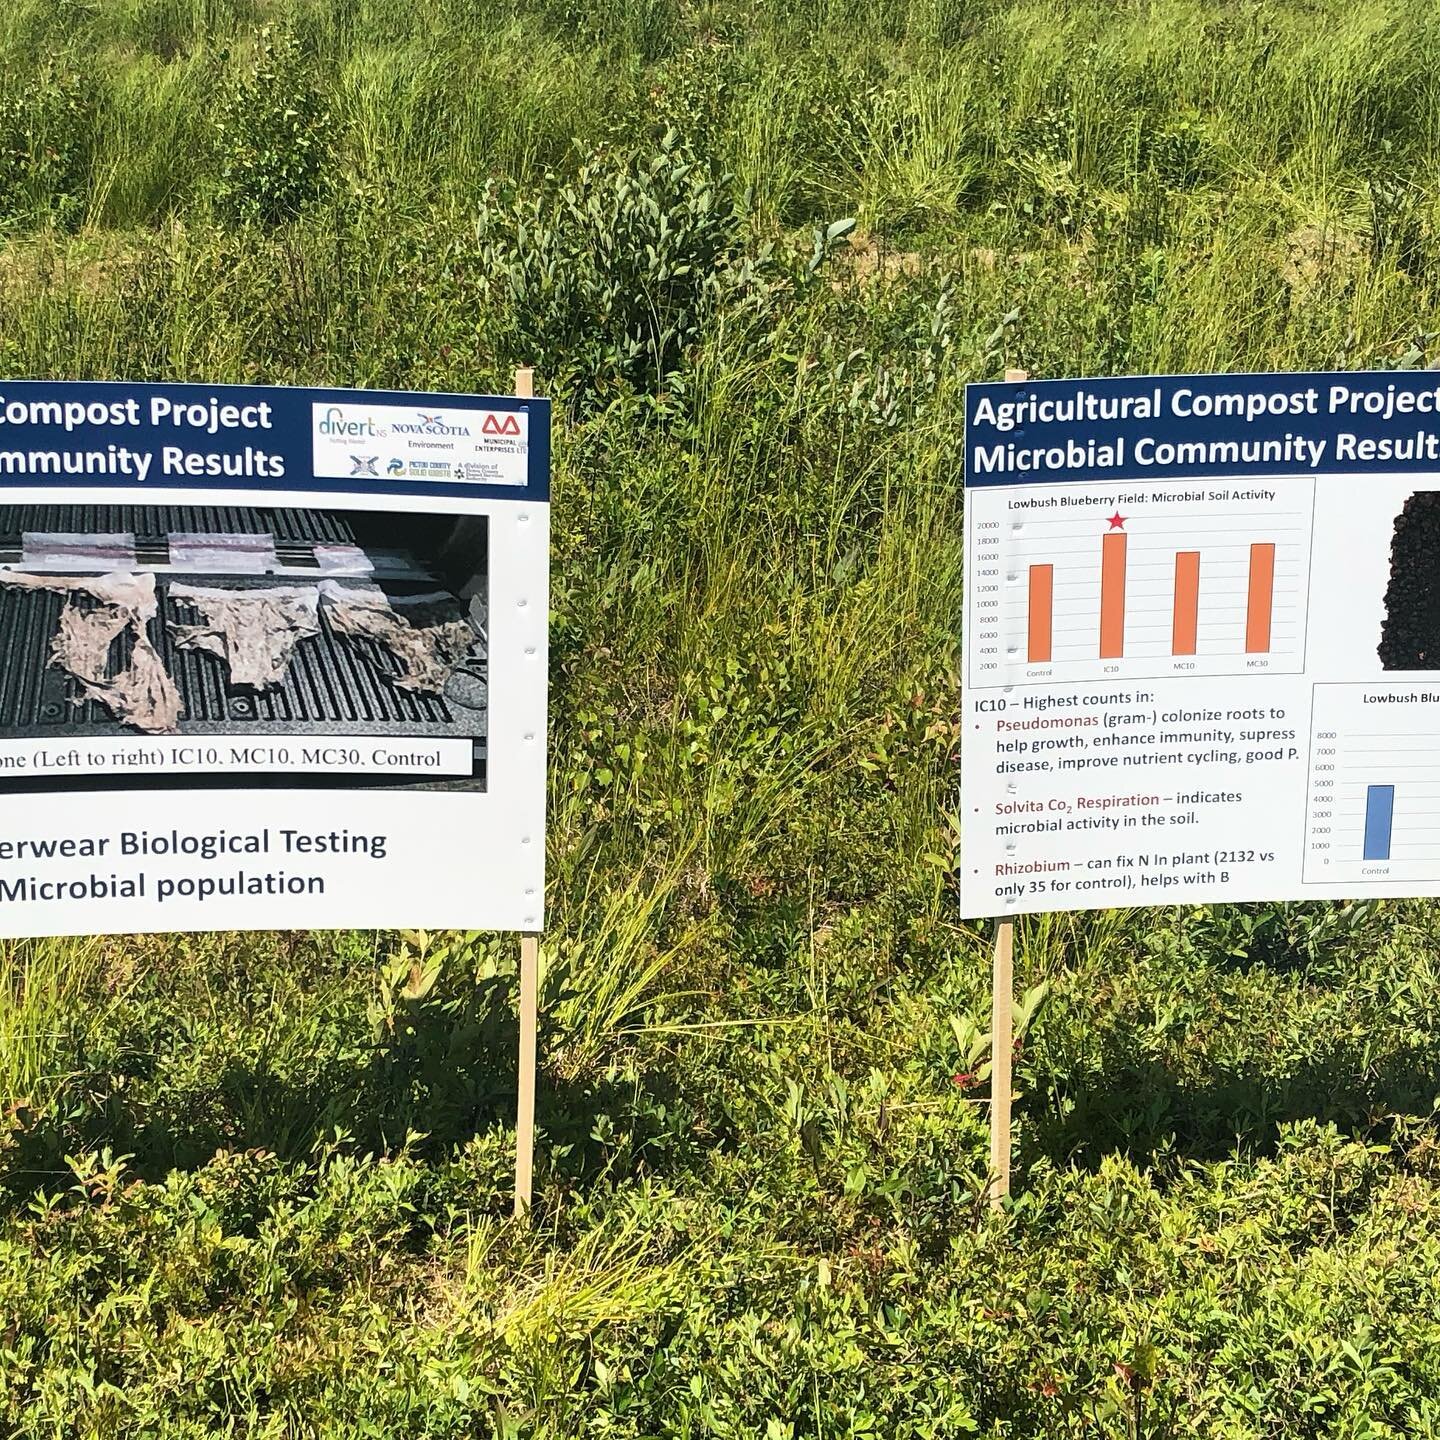 Sneak peak #2 of #blueberry field day in Thurs! Setting up signs to share new info to improve #soilhealth &amp; #cropyield! #compost @DivertNS @MunicipalGroup1 @ns_environment